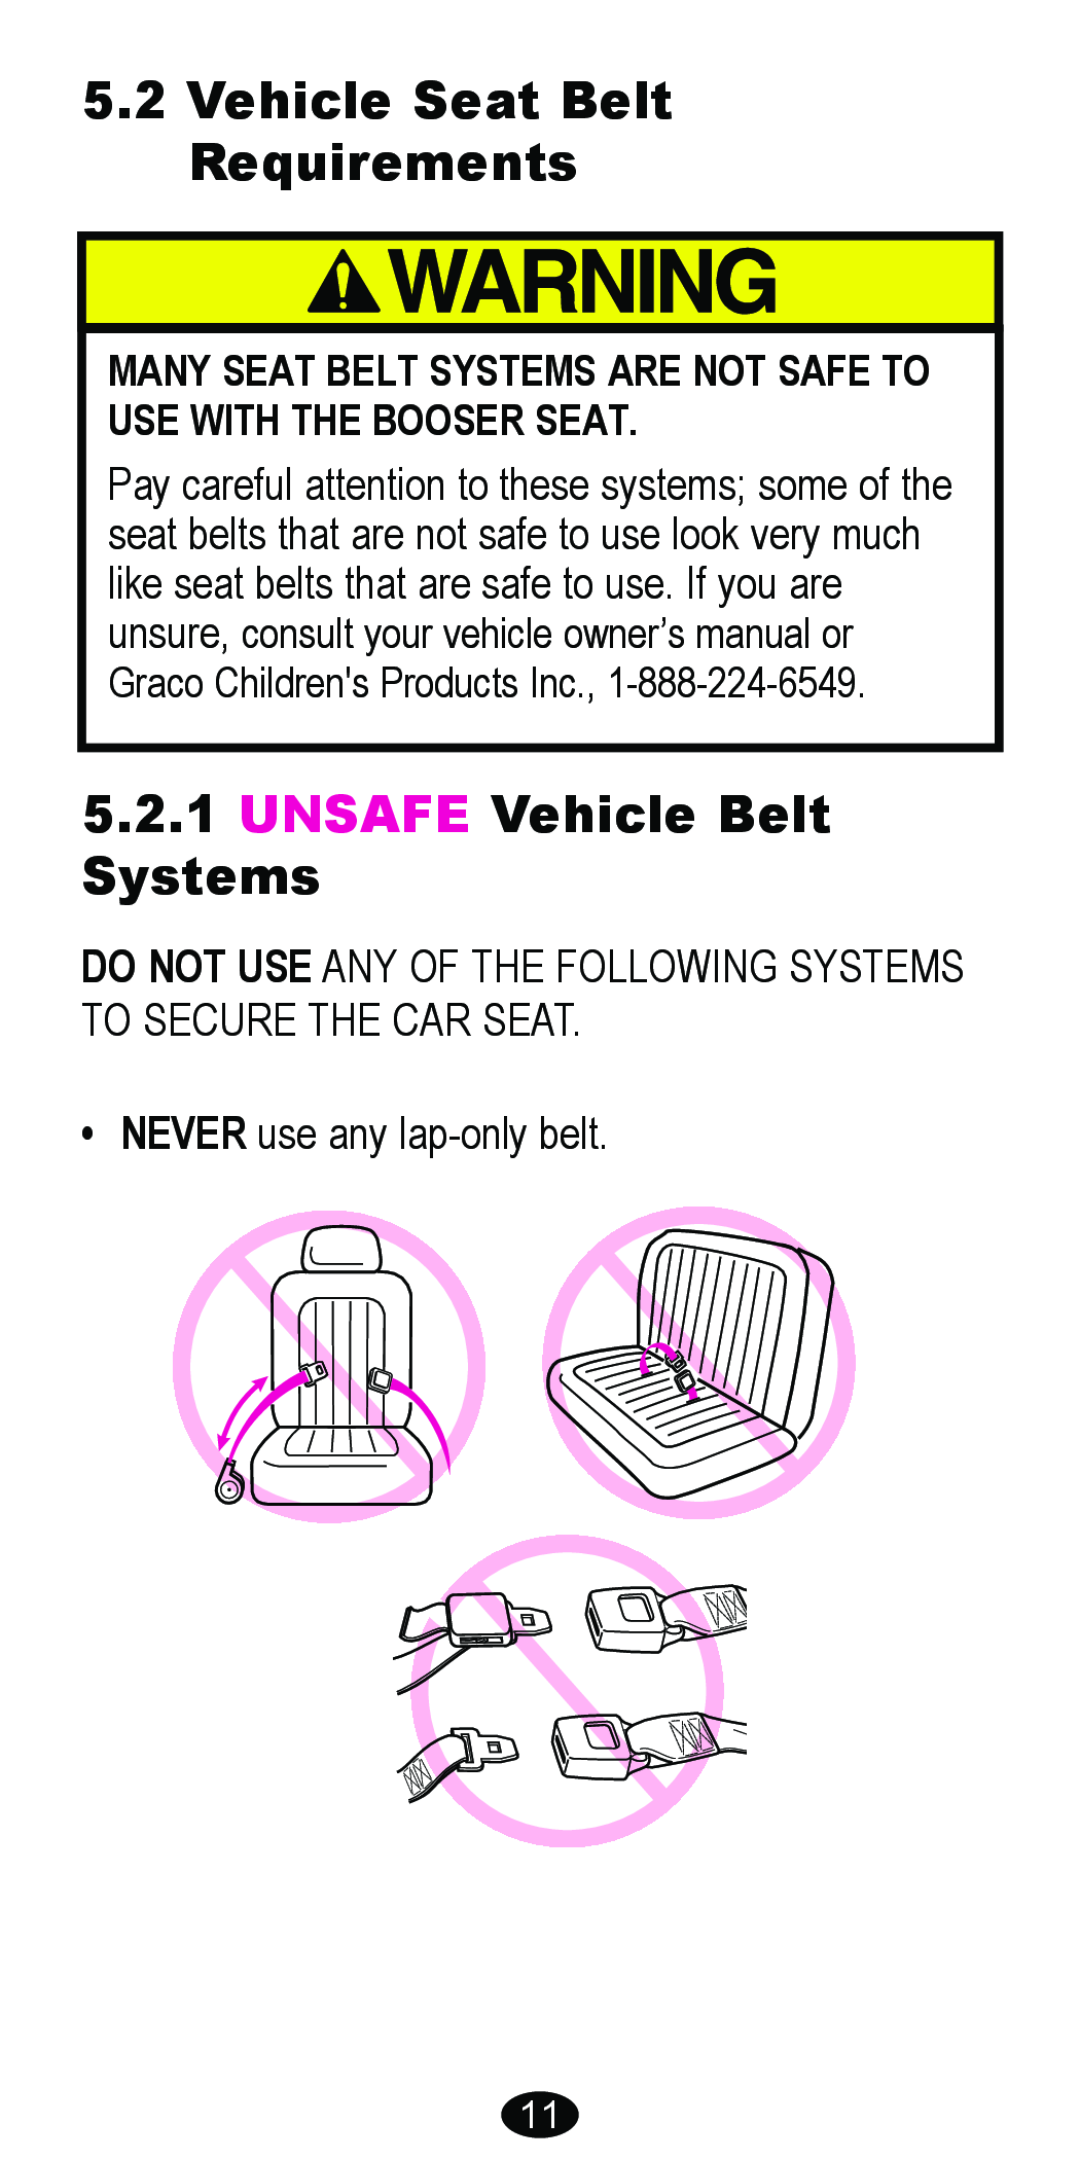 Graco 8481 owner manual Vehicle Seat Belt Requirements, UNSAFE Vehicle Belt Systems, NEVER use any lap-only belt 